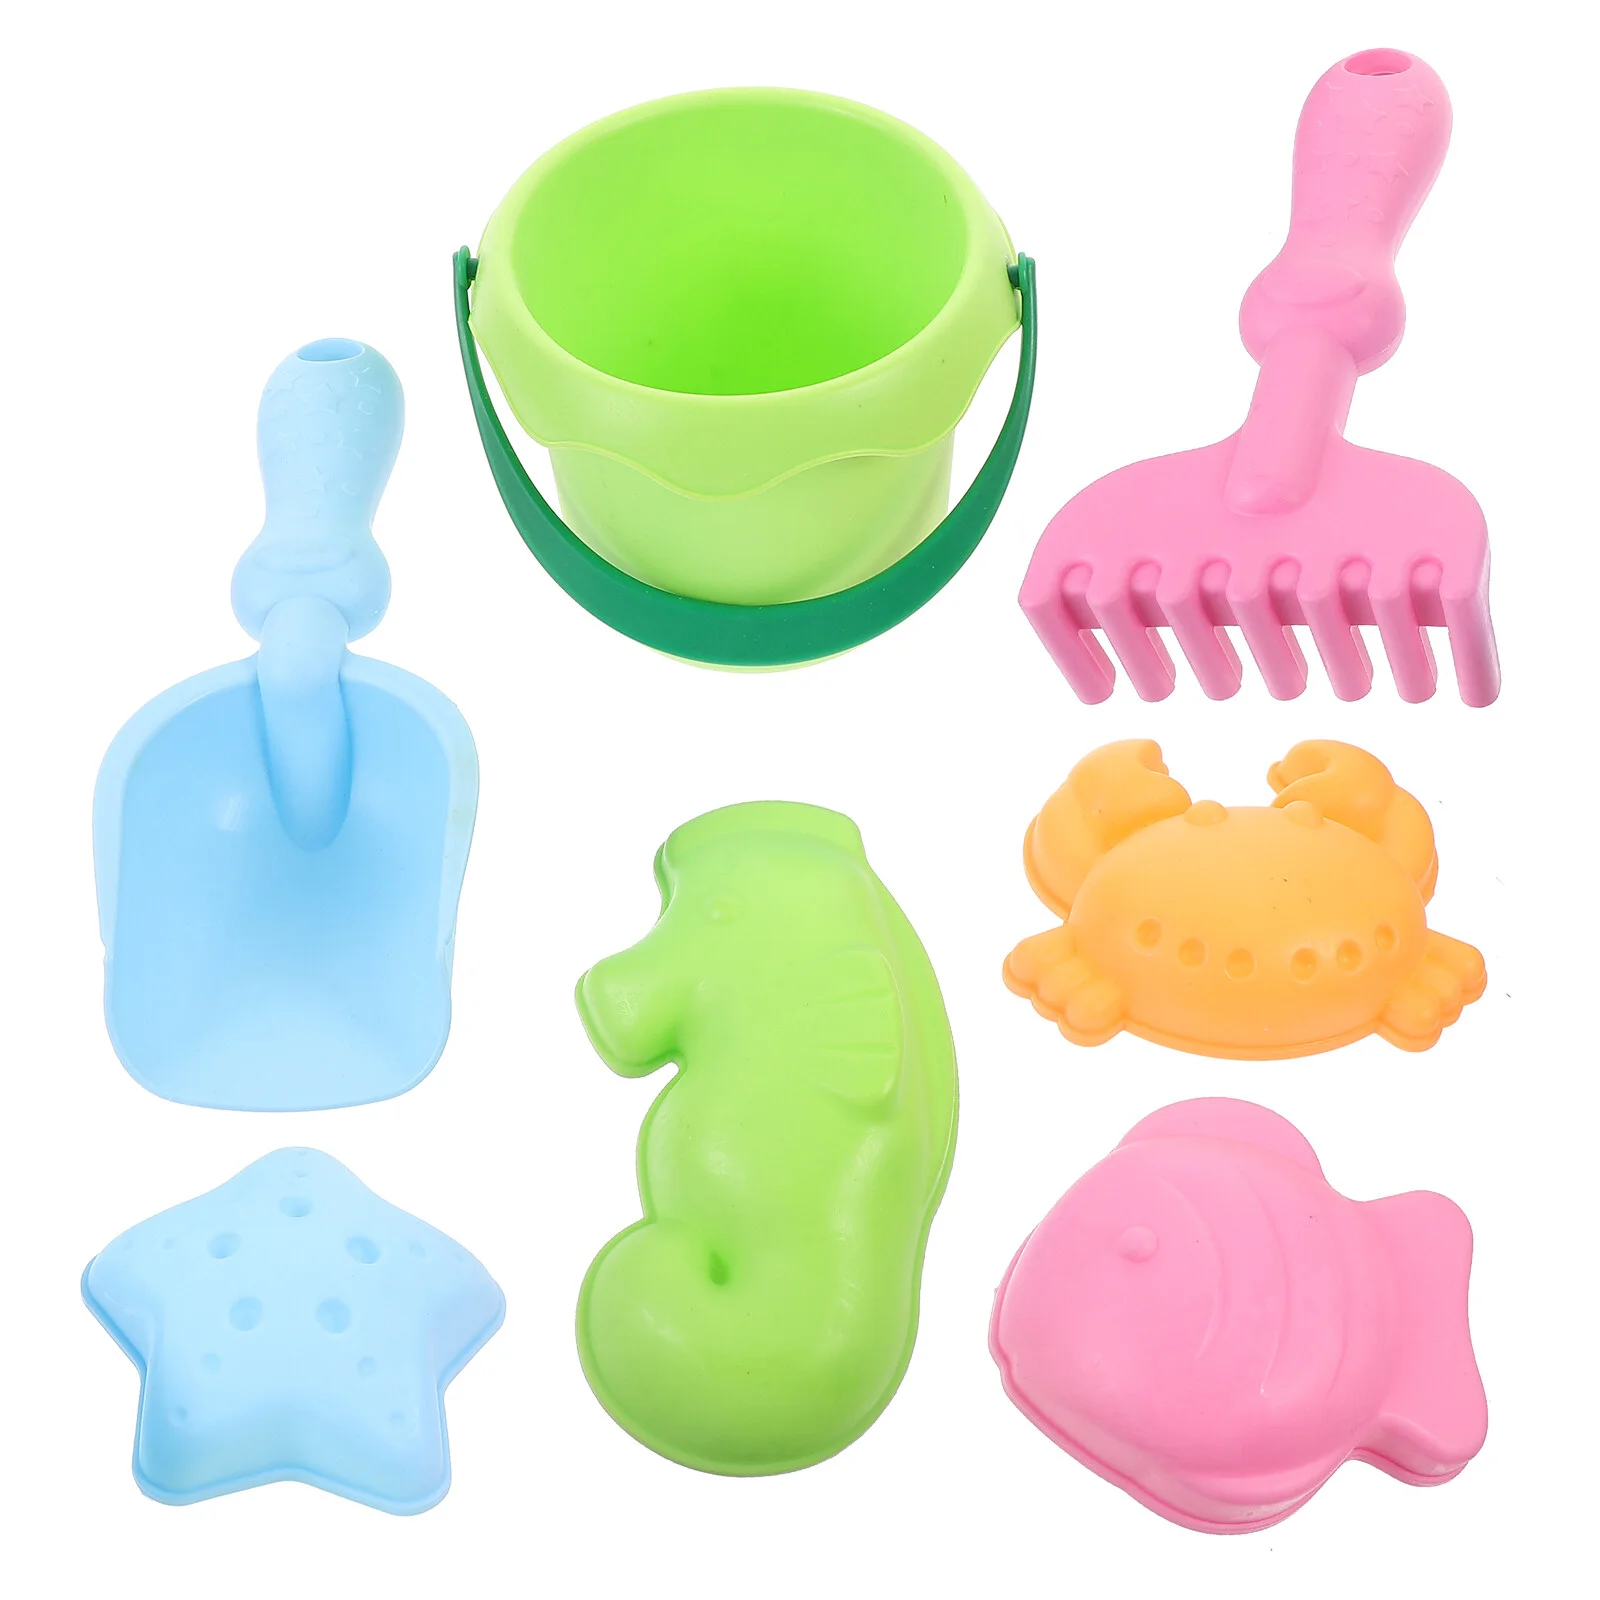 

1 Set of 7pcs Beach Toys Outdoor Water Playing Toys Sand Molds Toys for Kids Children (Random Color)